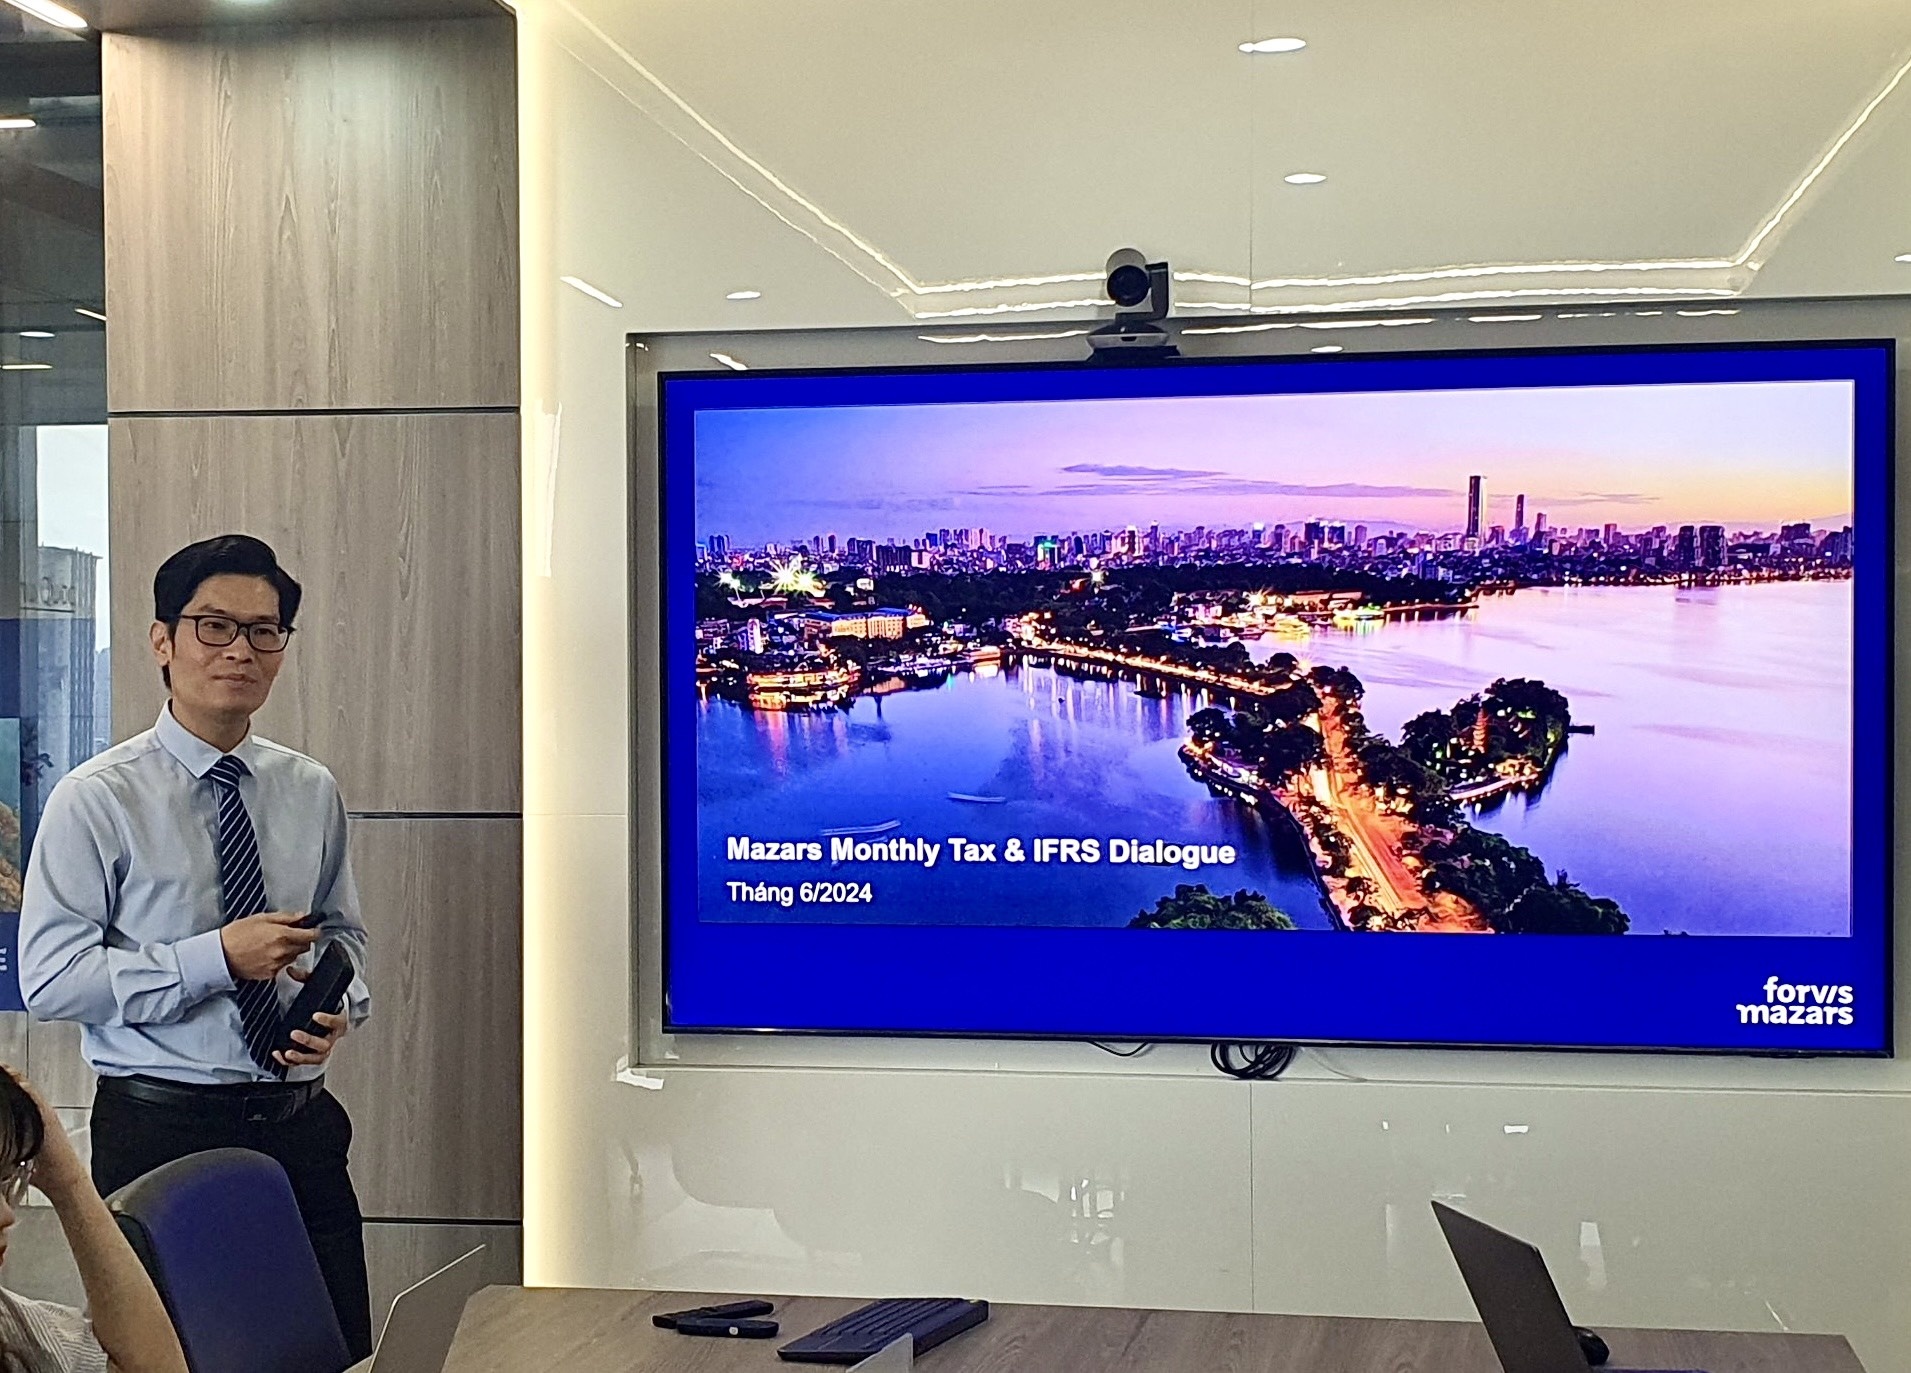 Forvis Mazars Tax & IFRS Dialogue connects businesses